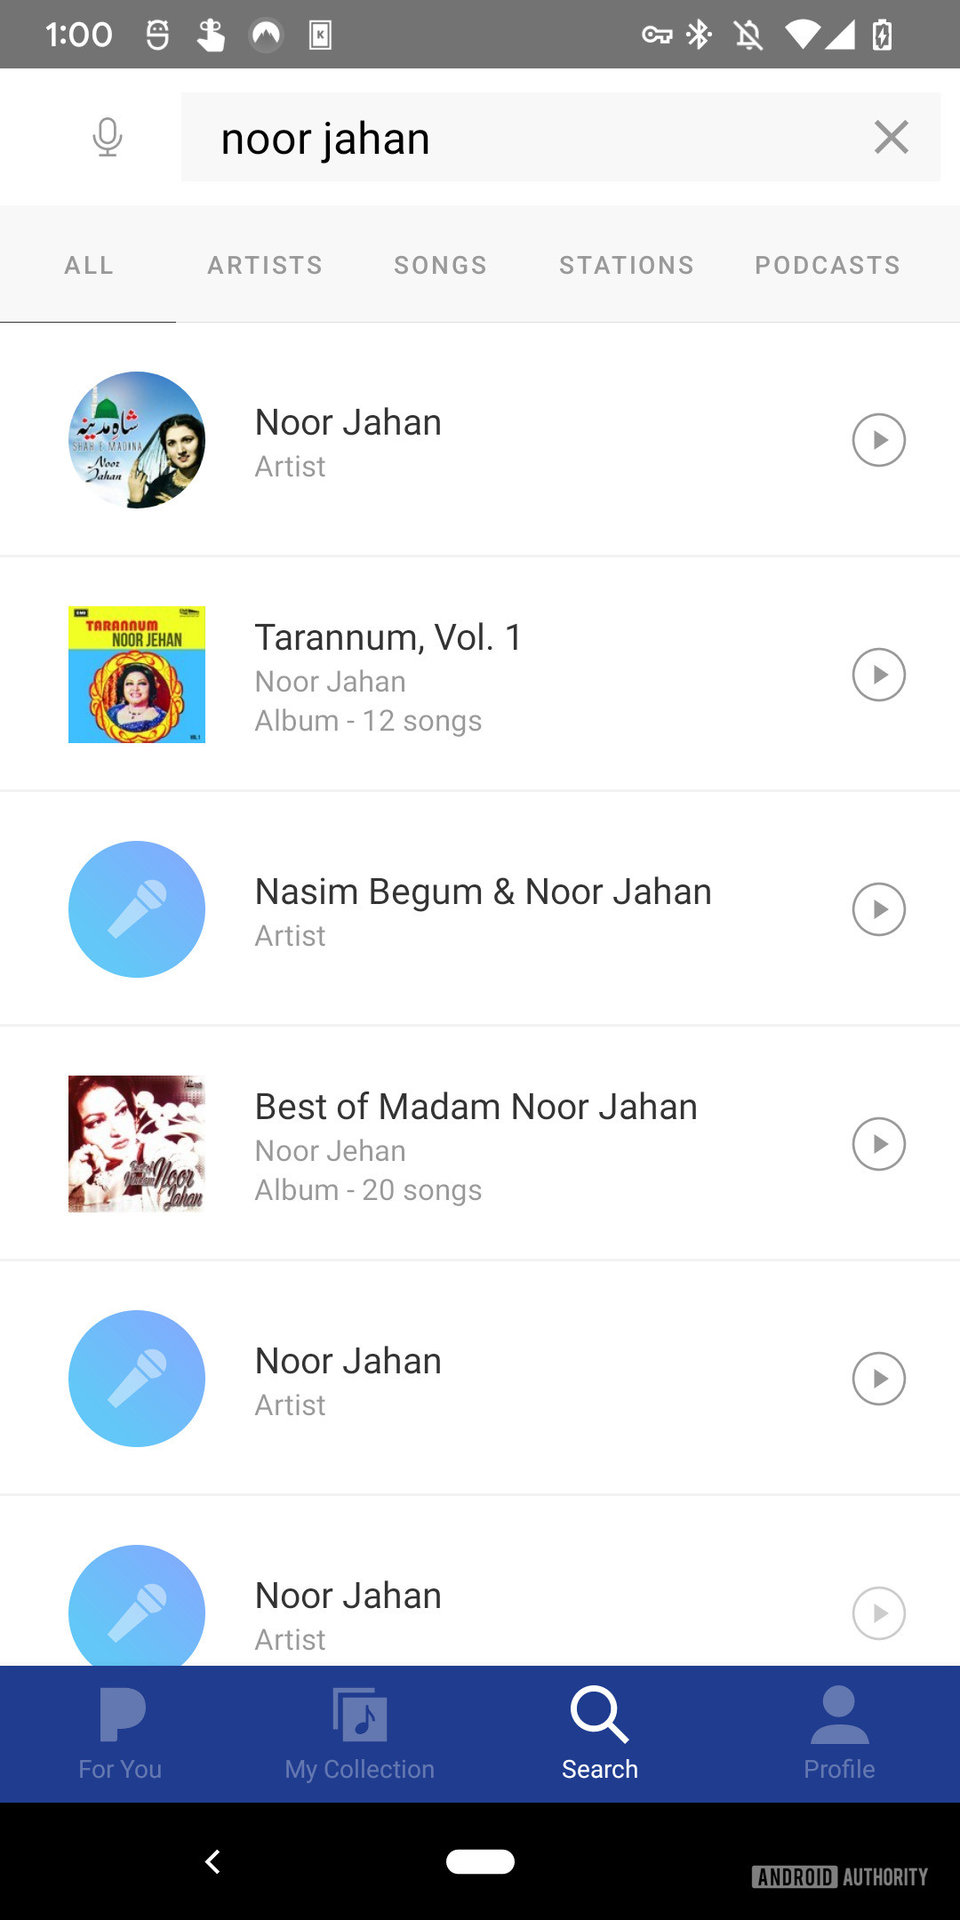 Screenshot of the Pandora app showing the results for searching for the artist Noor Jahan.